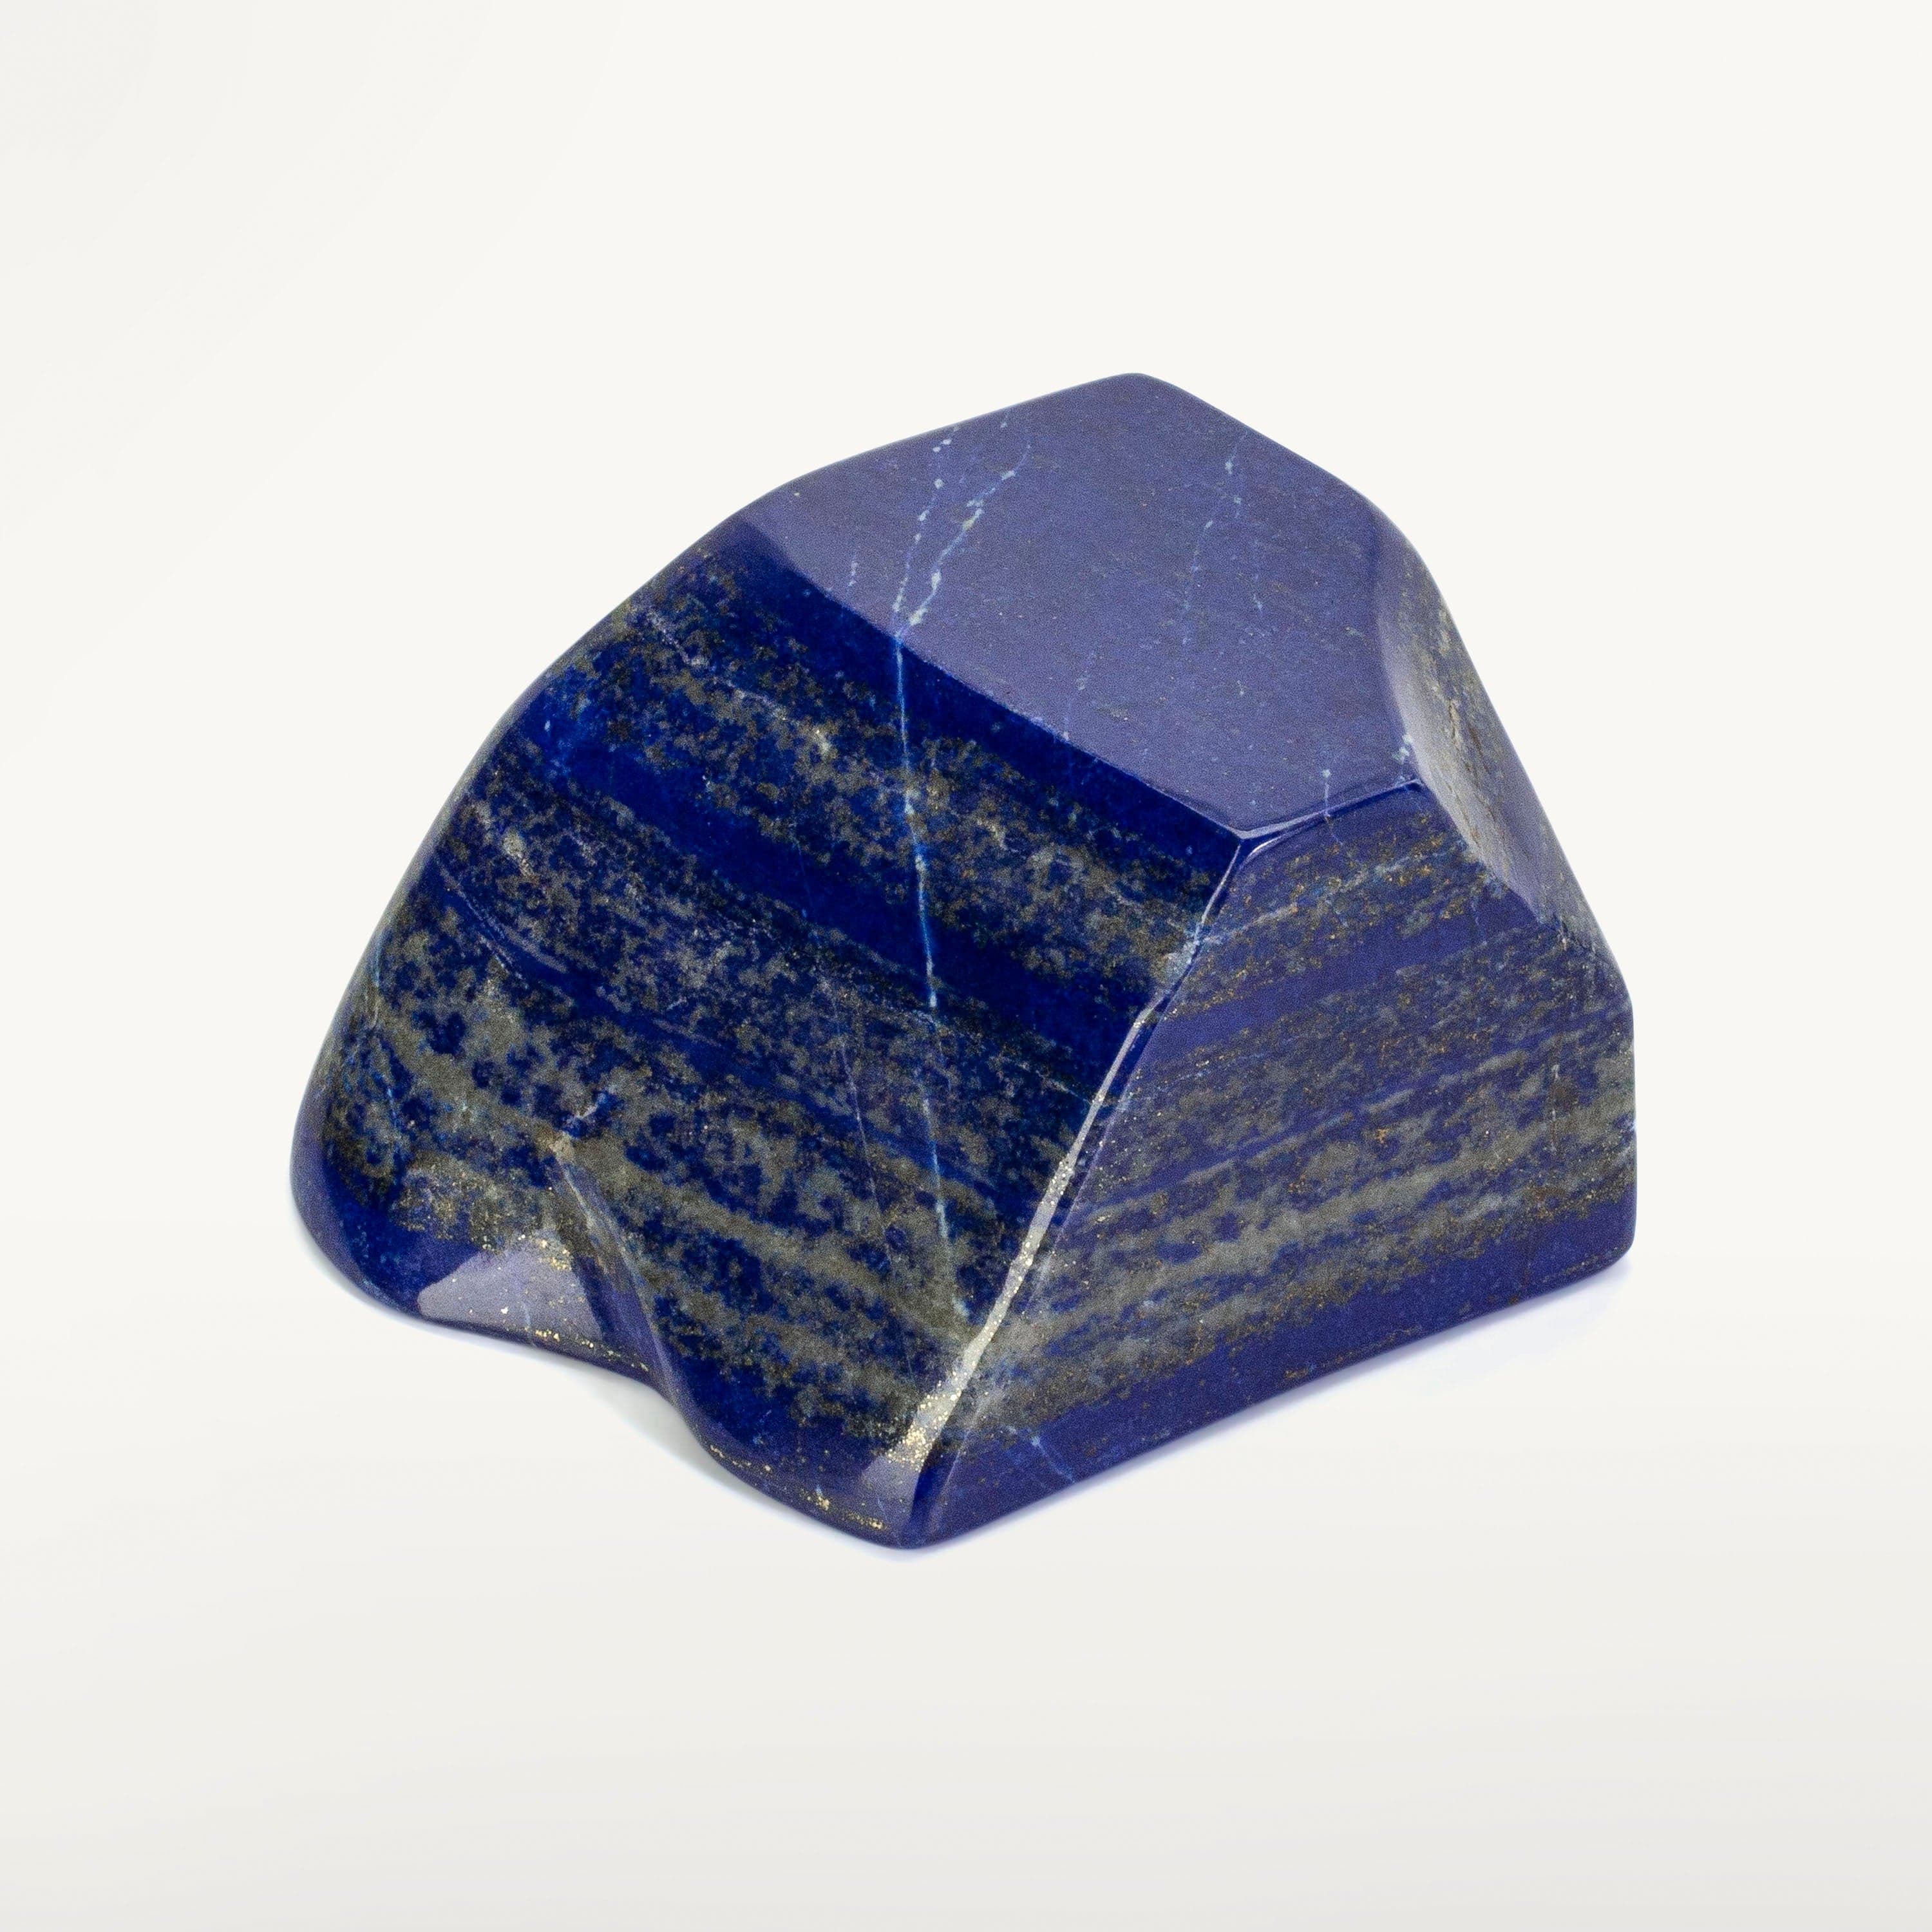 Kalifano Lapis Lapis Lazuil Freeform from Afghanistan - 880 g / 1.9 lbs LP1000.002